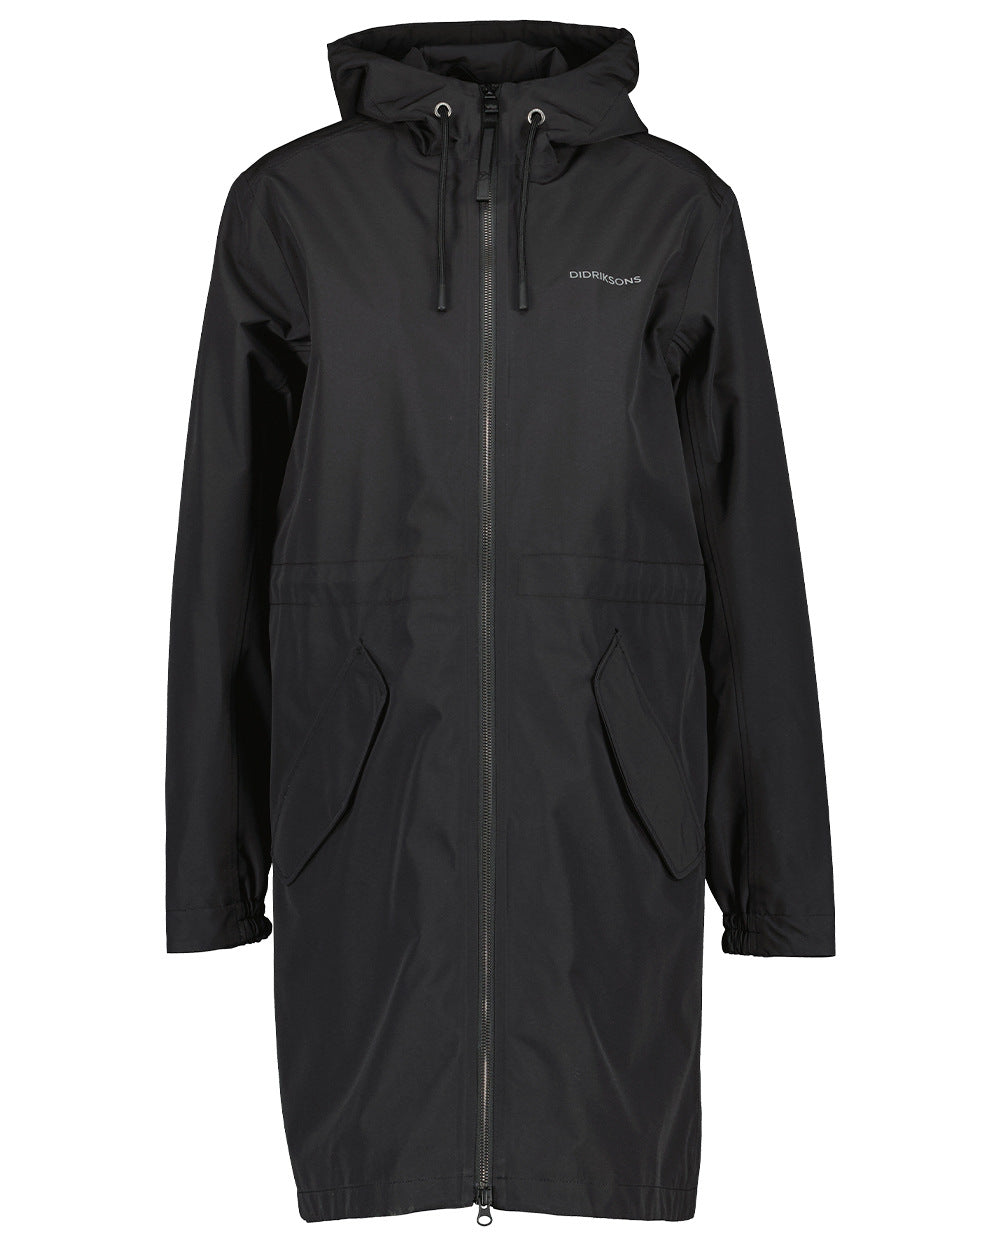 Black Coloured Didriksons Marta Womens Parka 3 On A White Background 